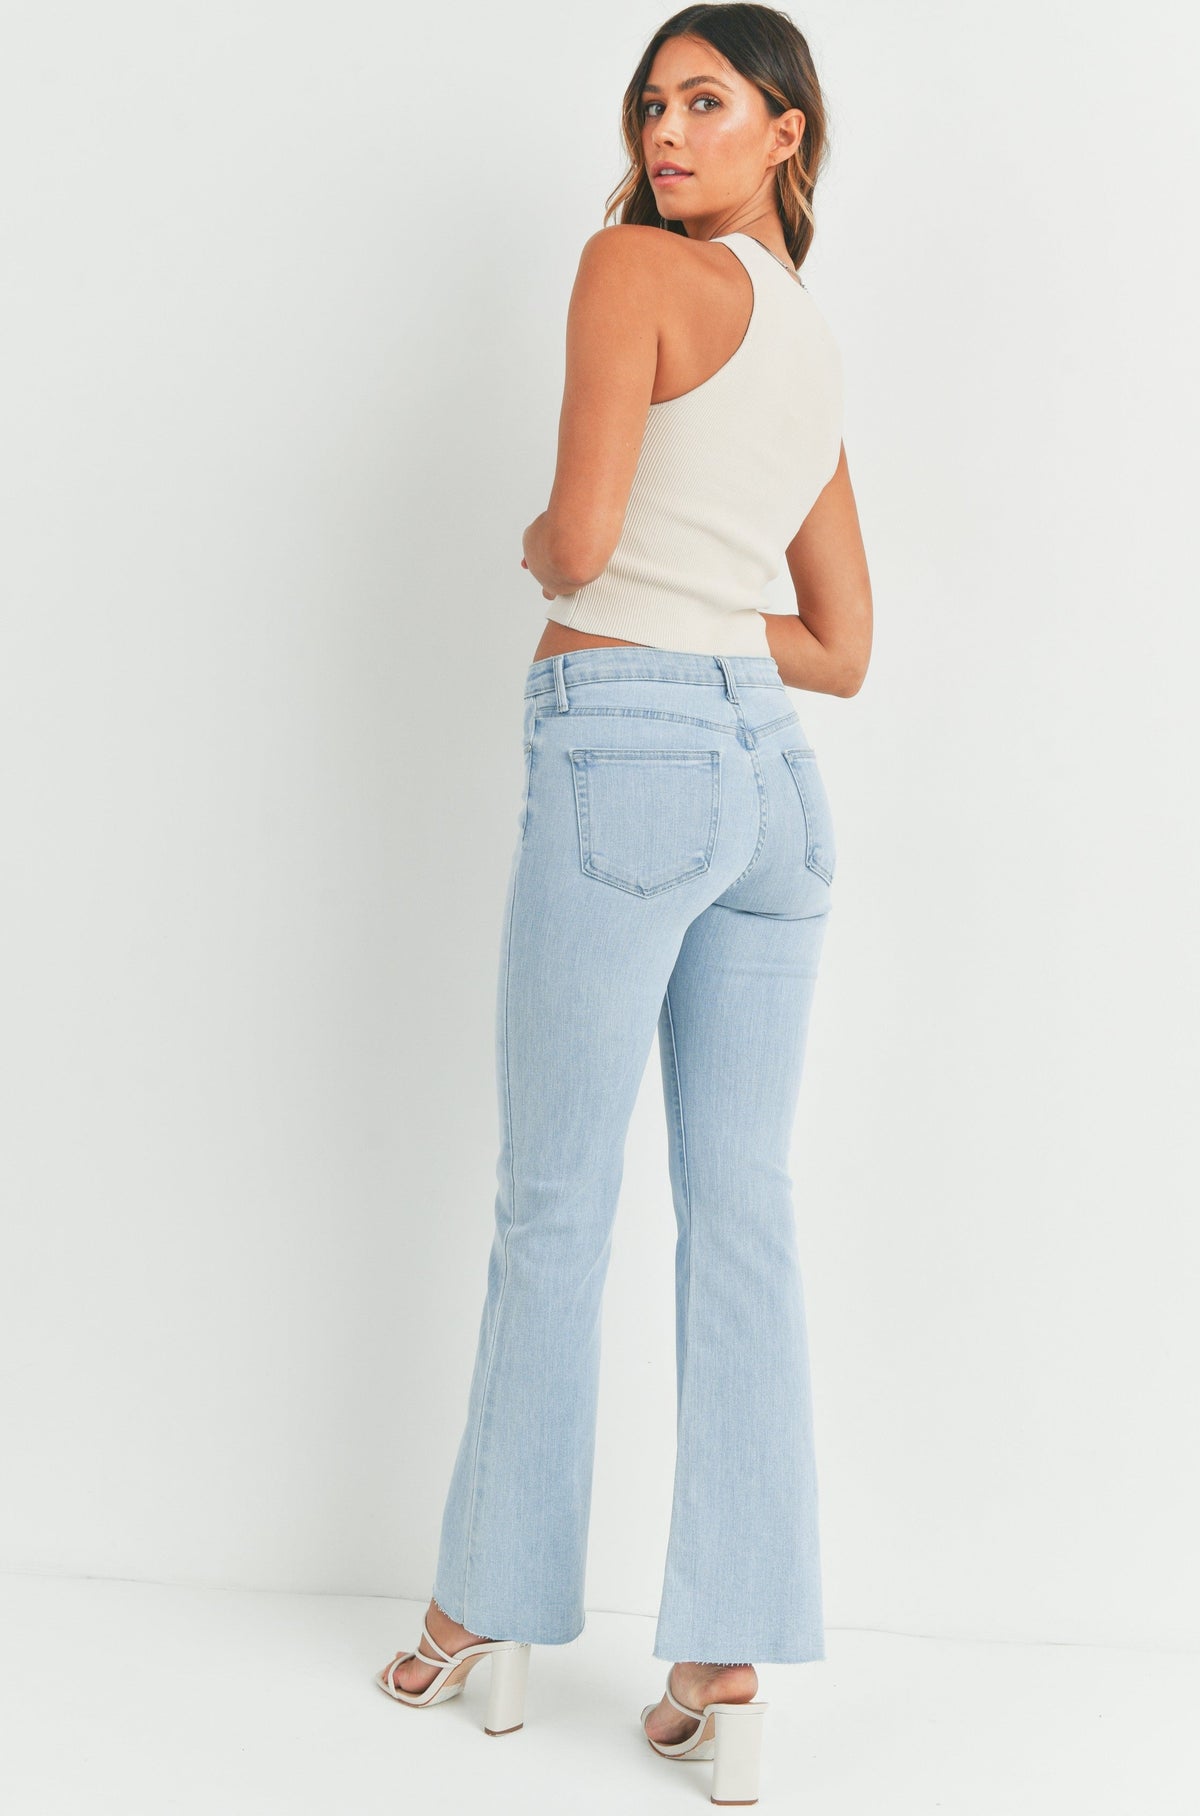 The Fall Flare Jean